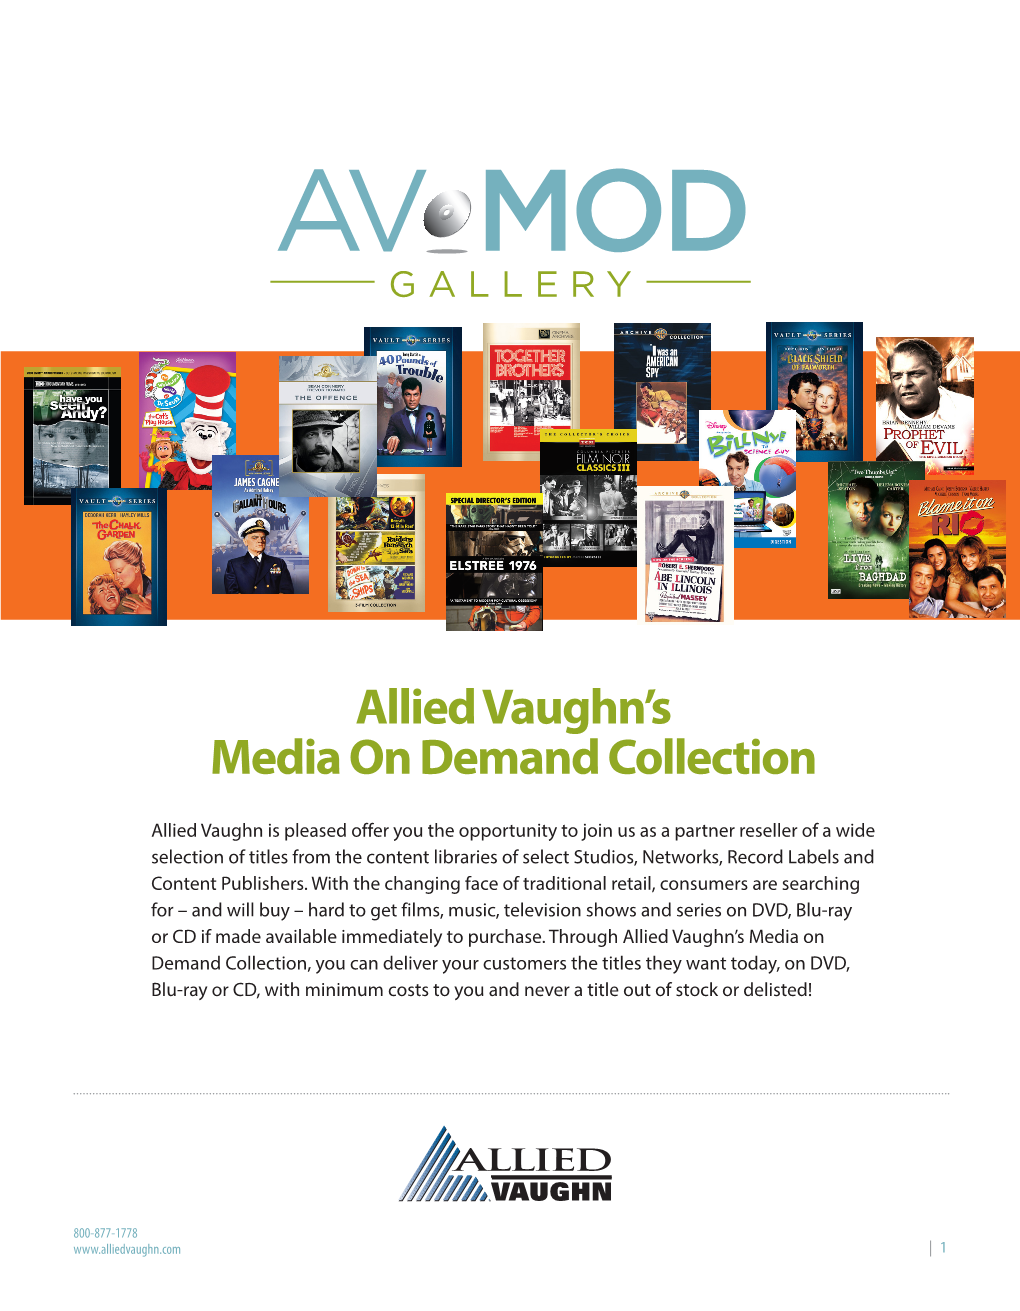 Allied Vaughn's Media on Demand Collection